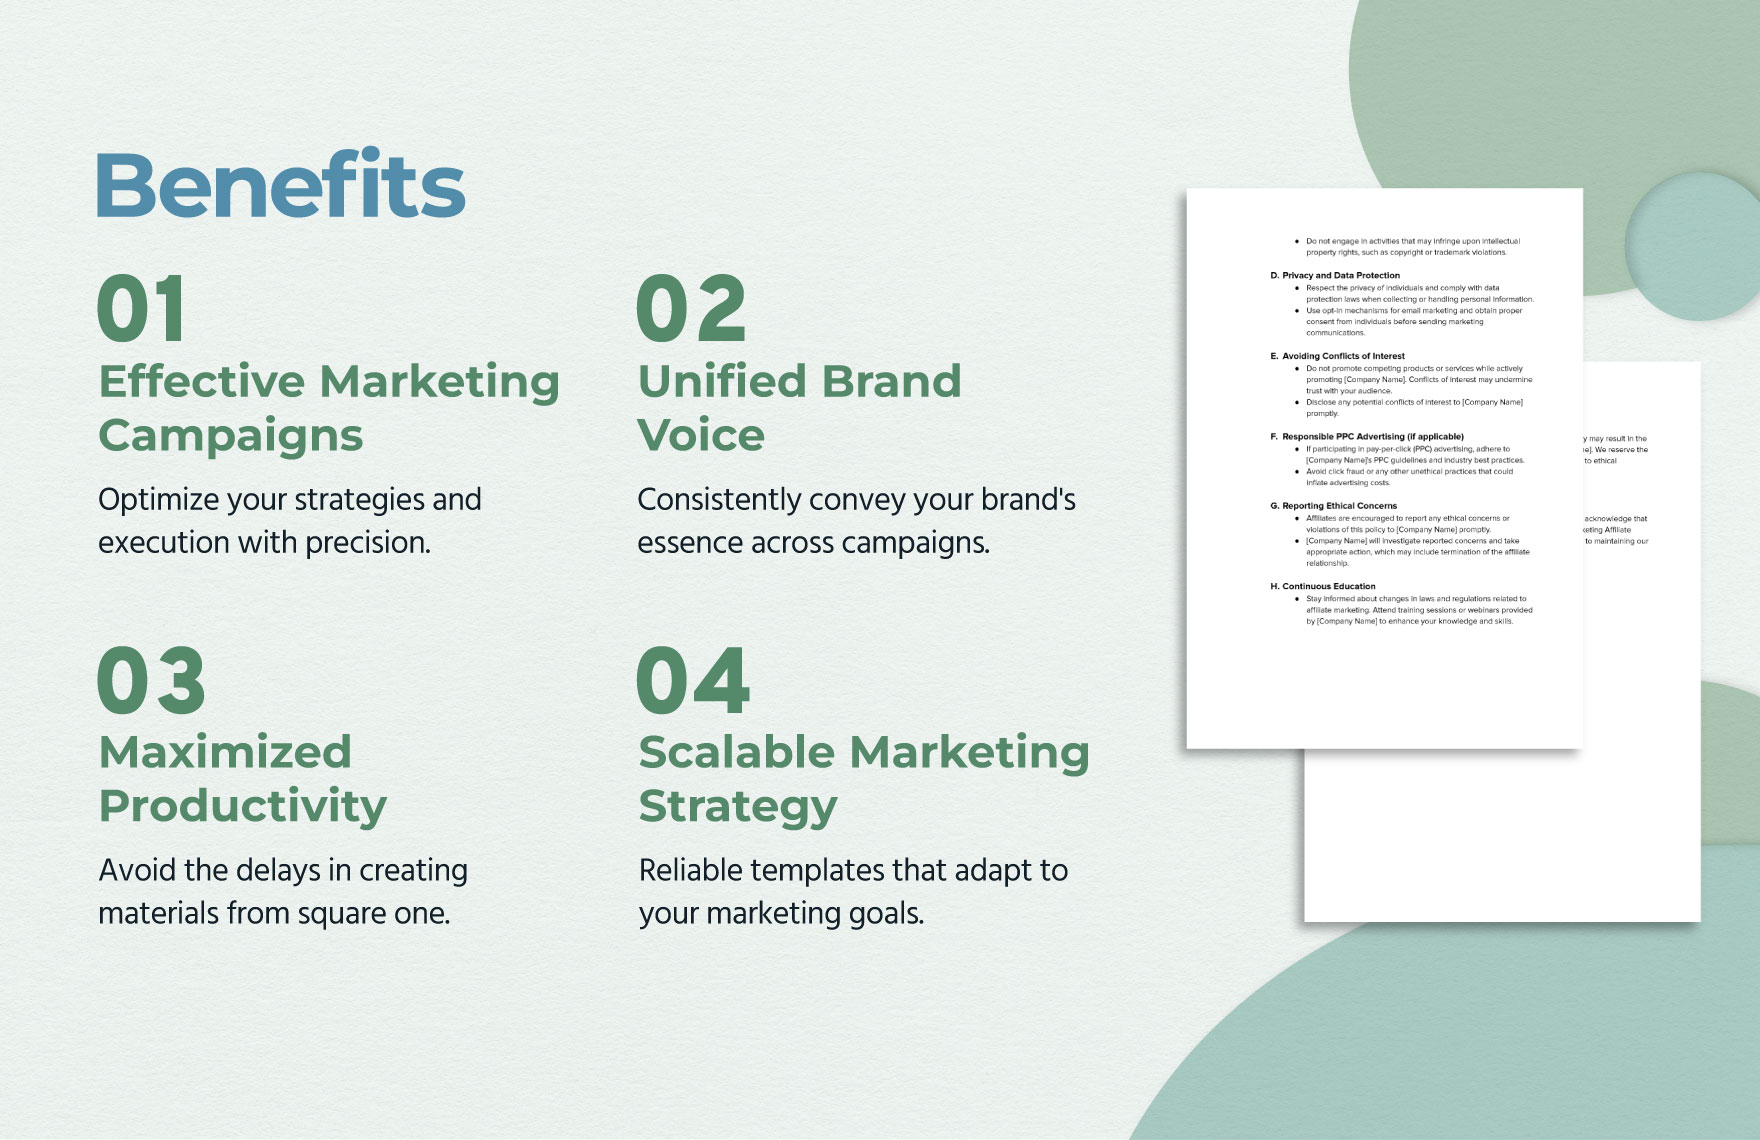 Marketing Affiliate Ethics Policy Template